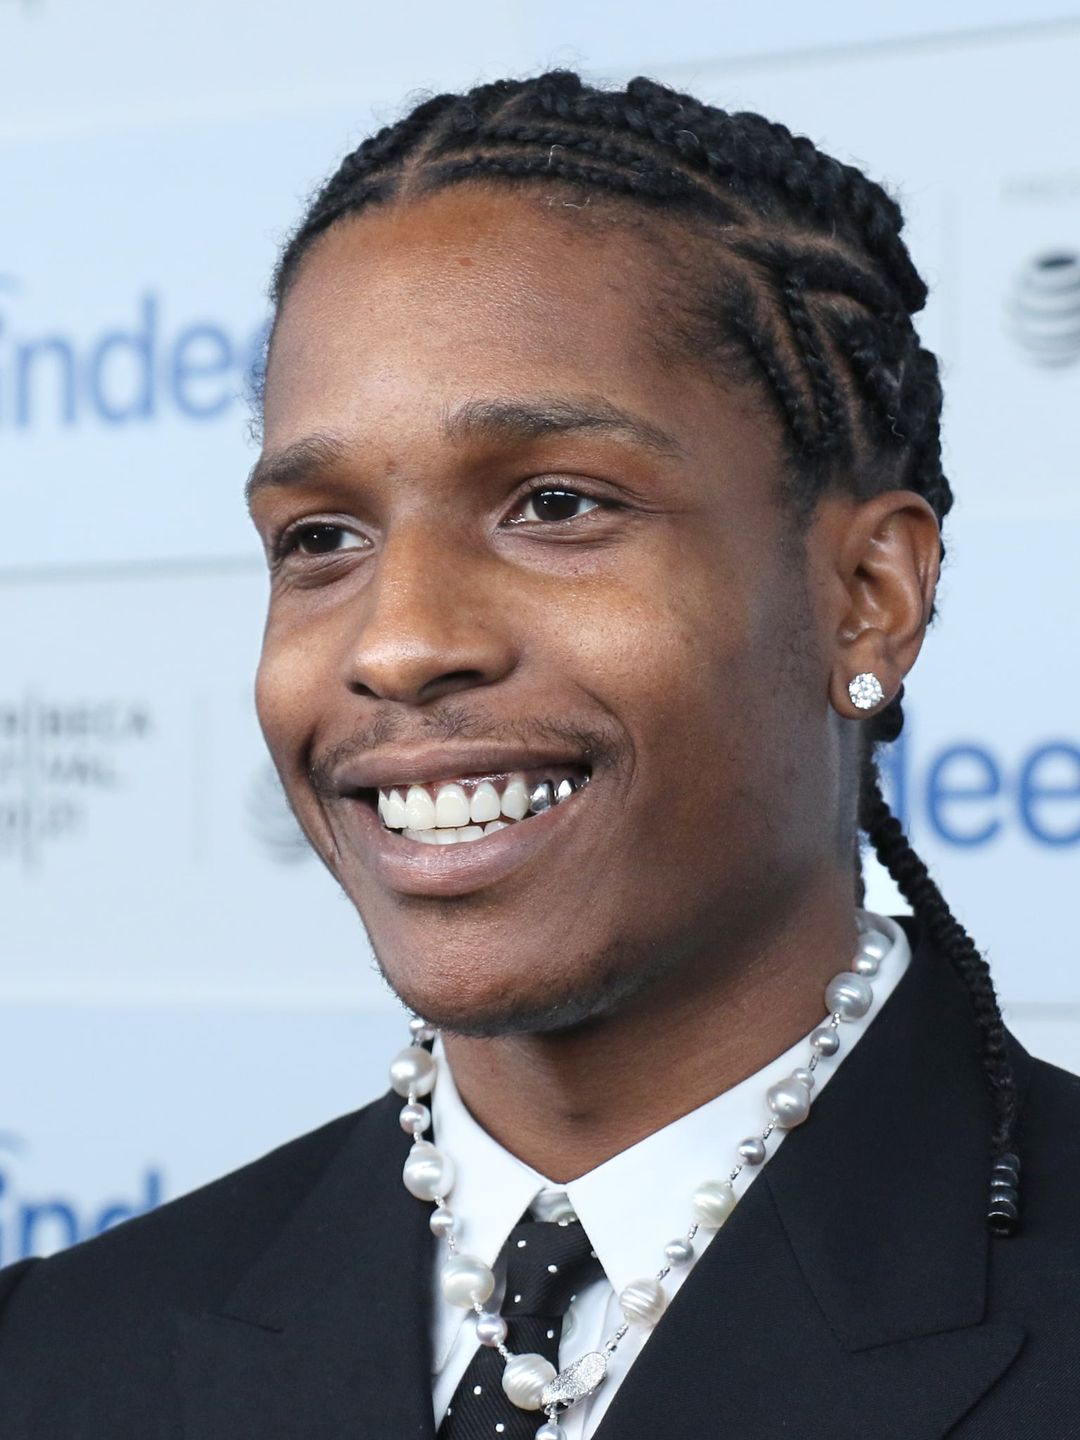 A$AP Rocky who is his father